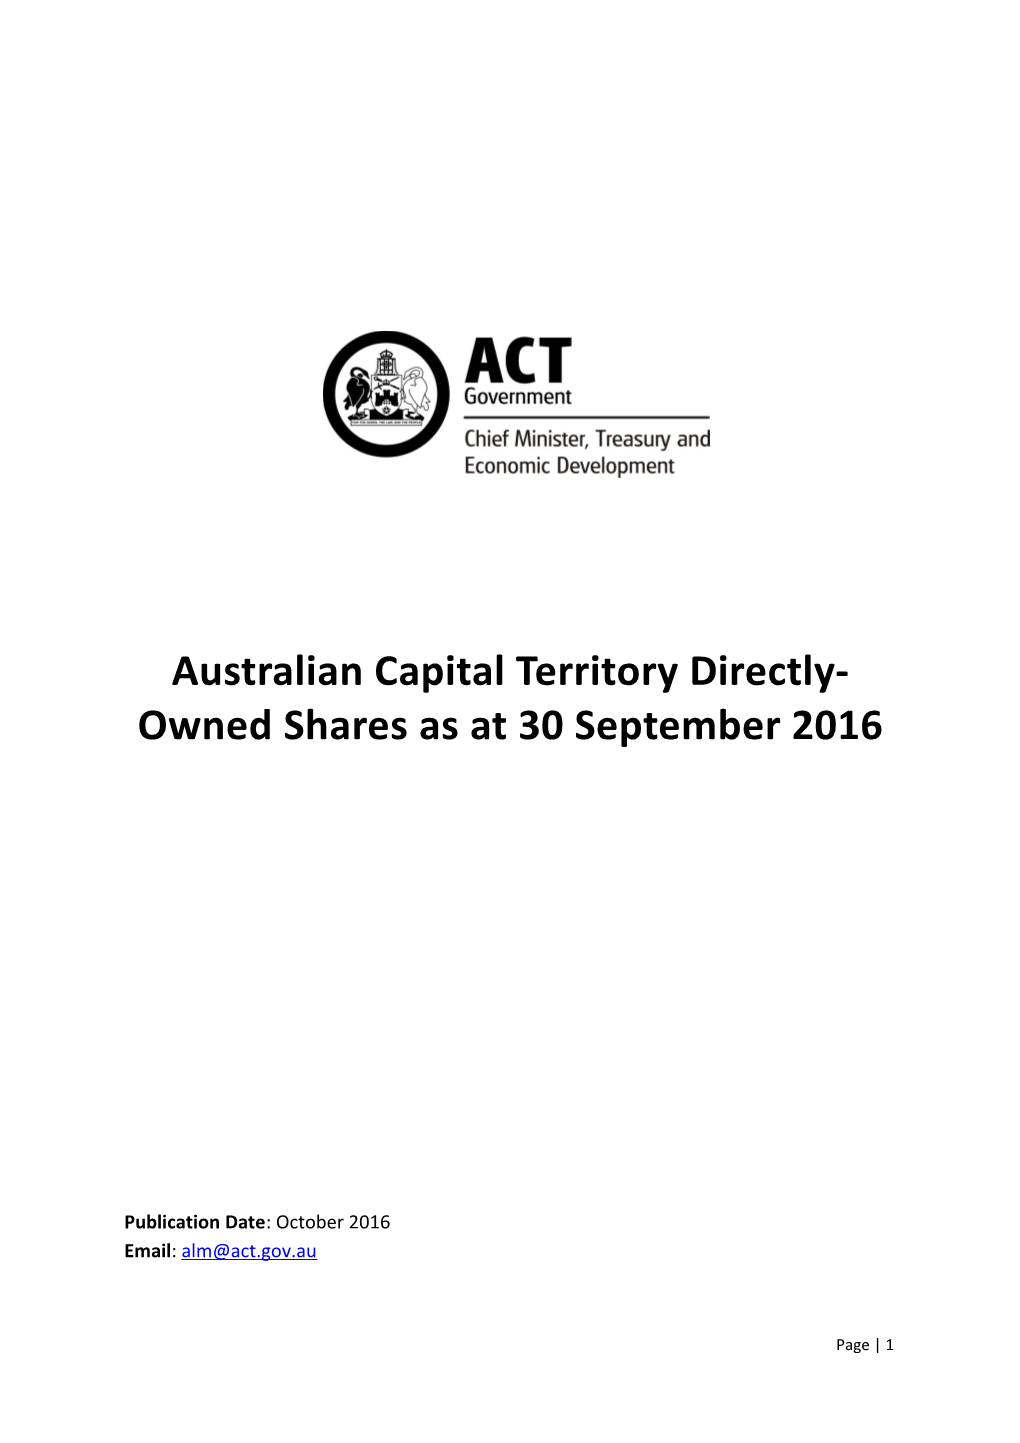 Australian Capital Territory Directly-Owned Shares As at 30 September 2016